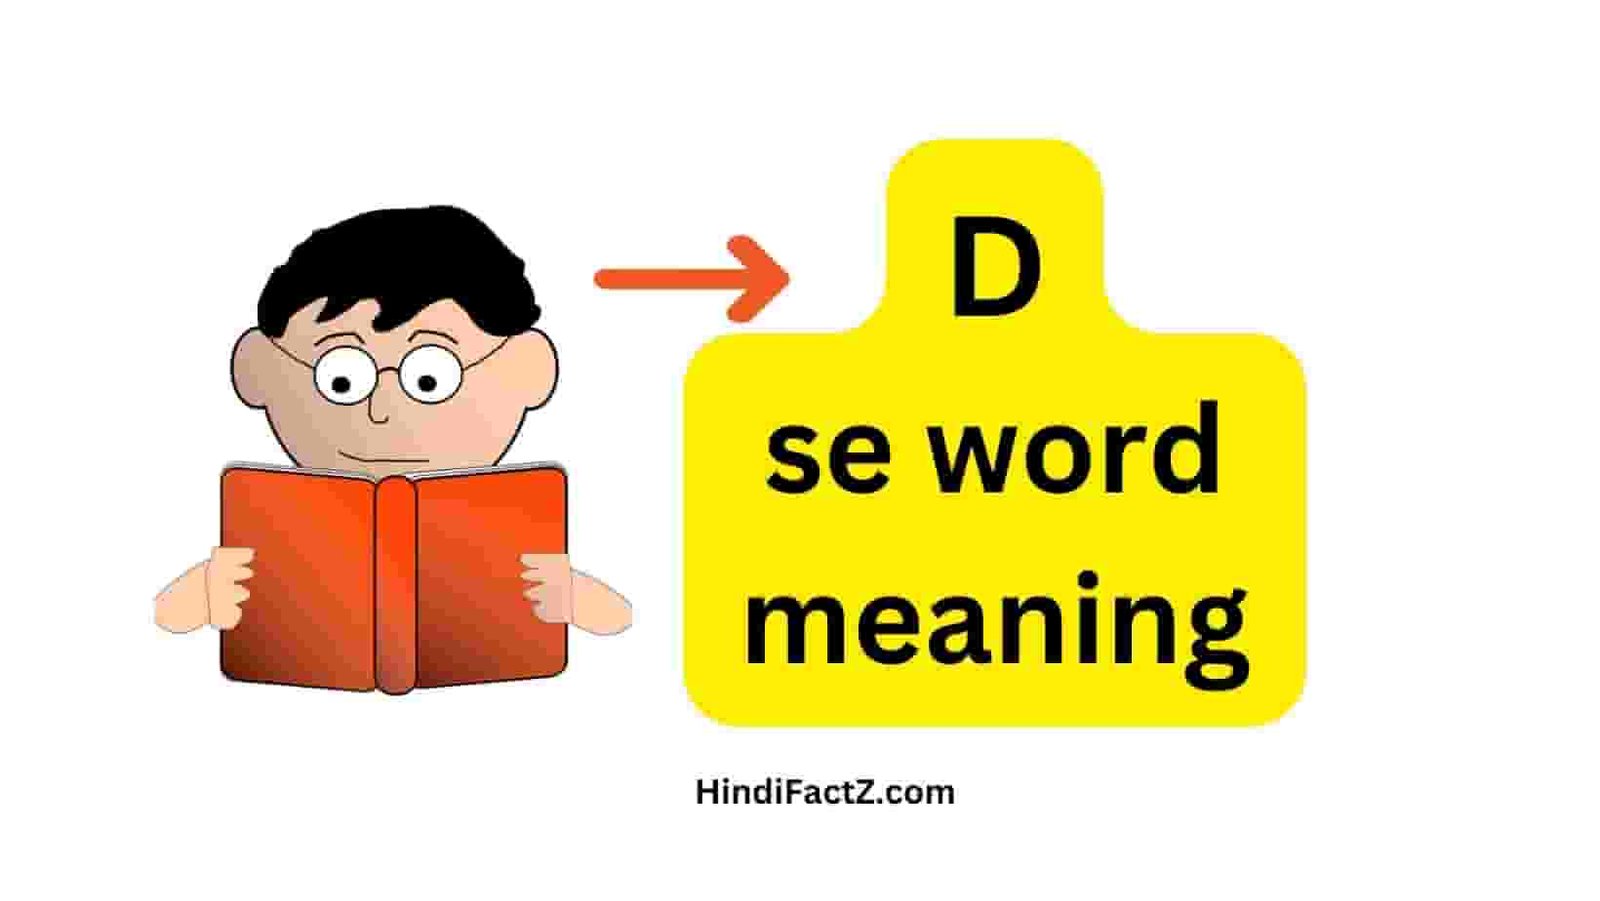 D se word meaning